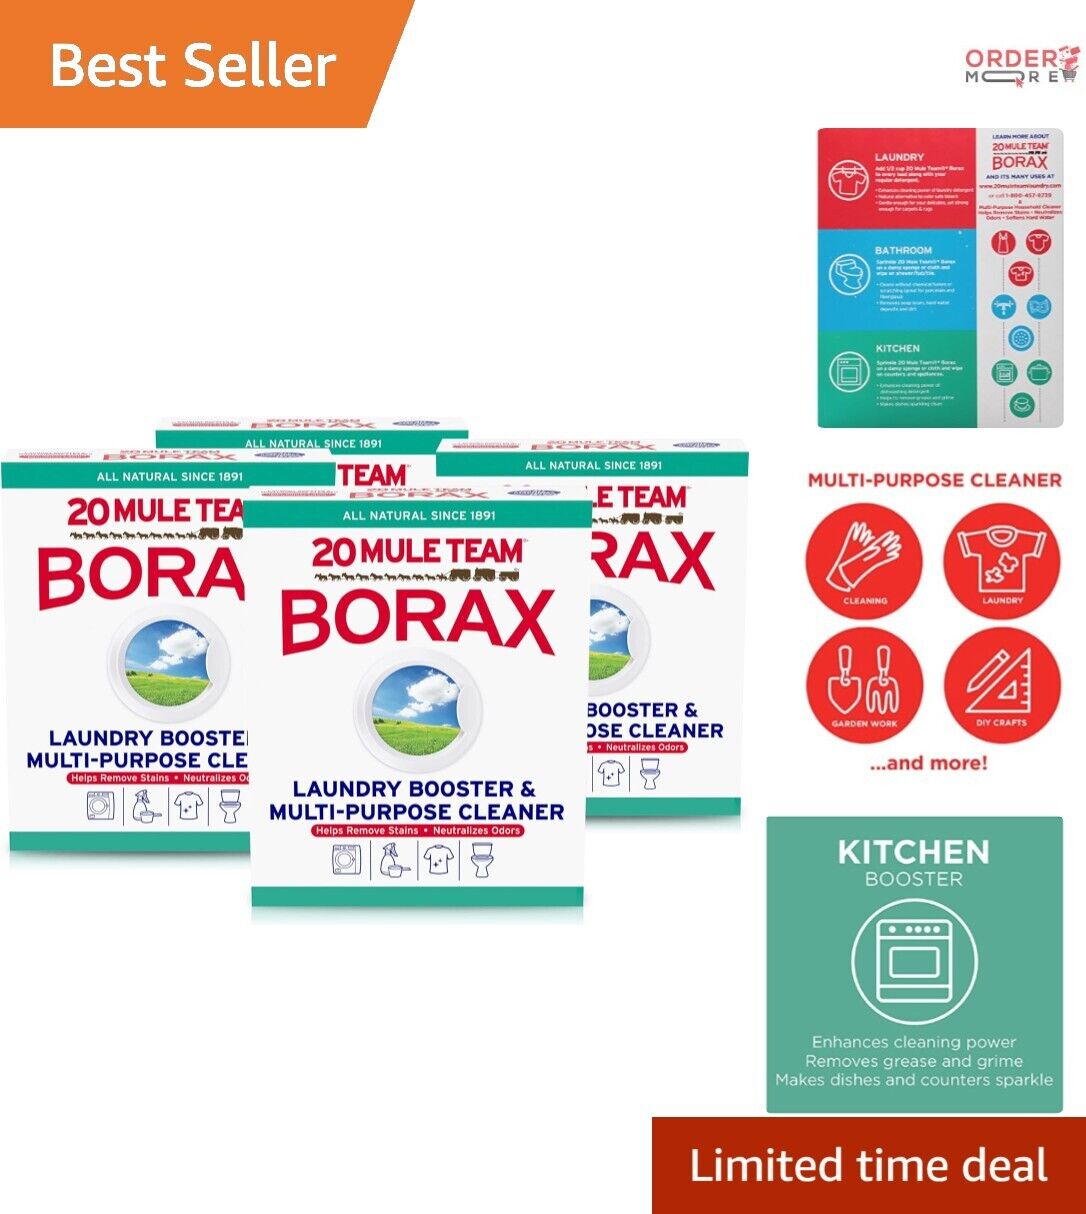 Borax Detergent Booster & Multi-Purpose Cleaner - All Natural, 65oz, 4 Count